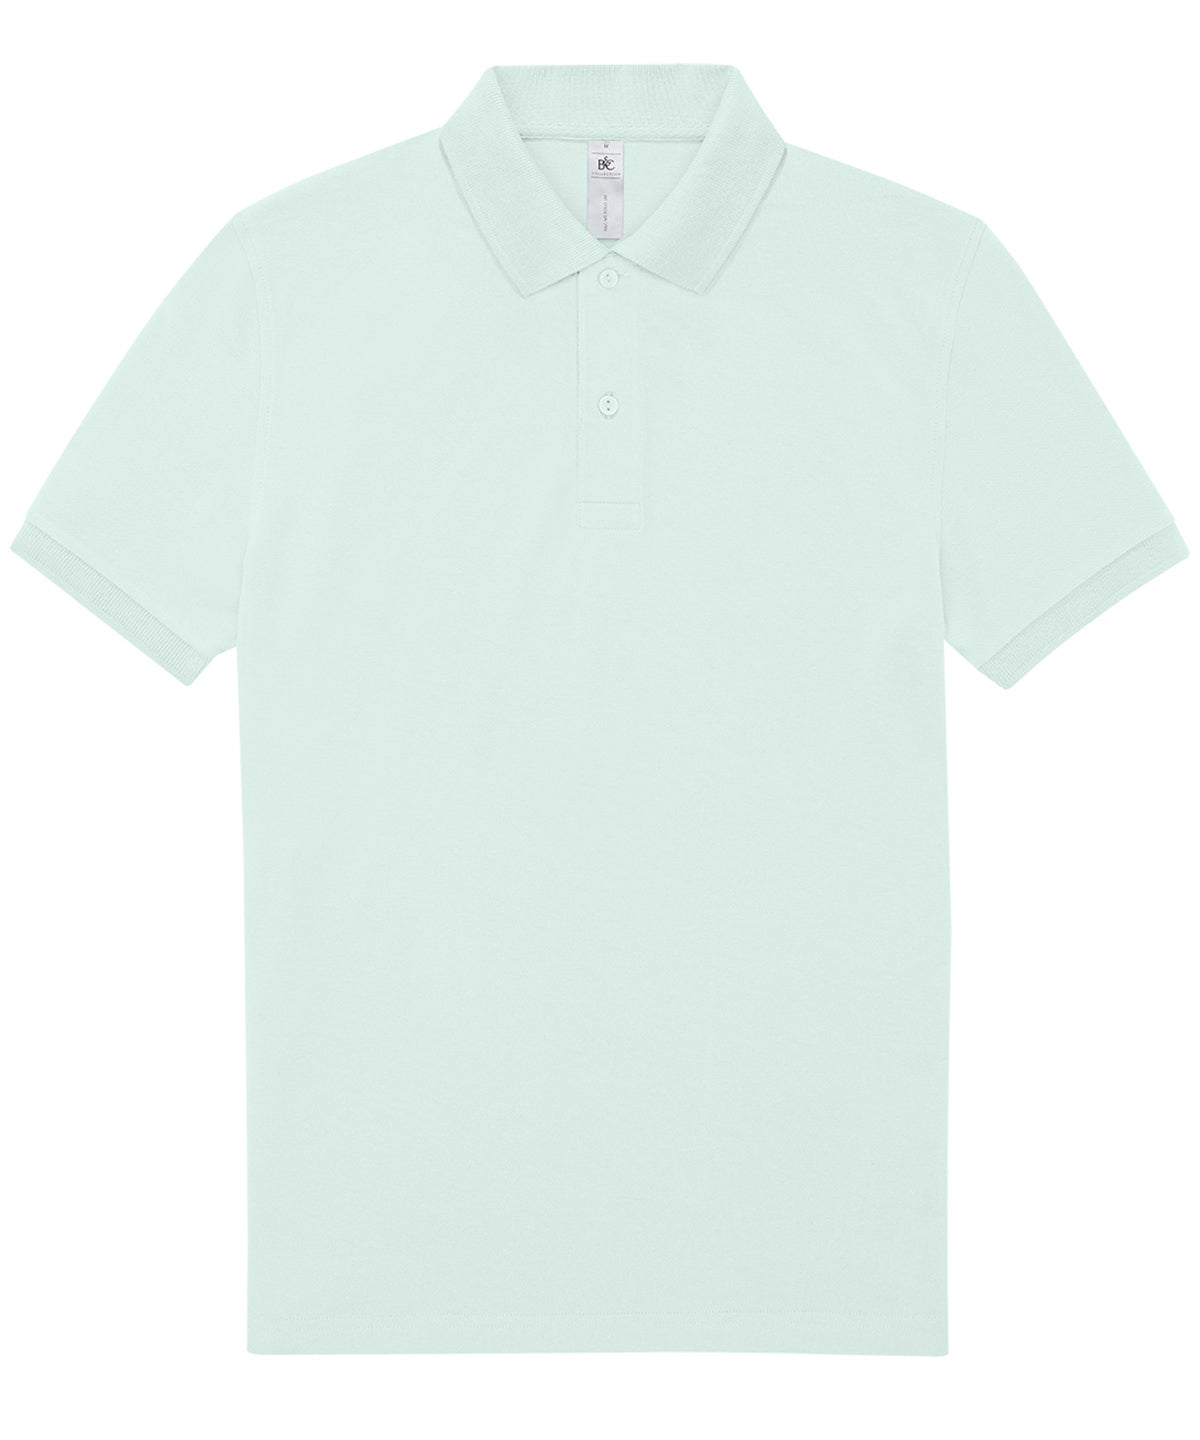 B&C Collection My Polo 180 Blush Mint